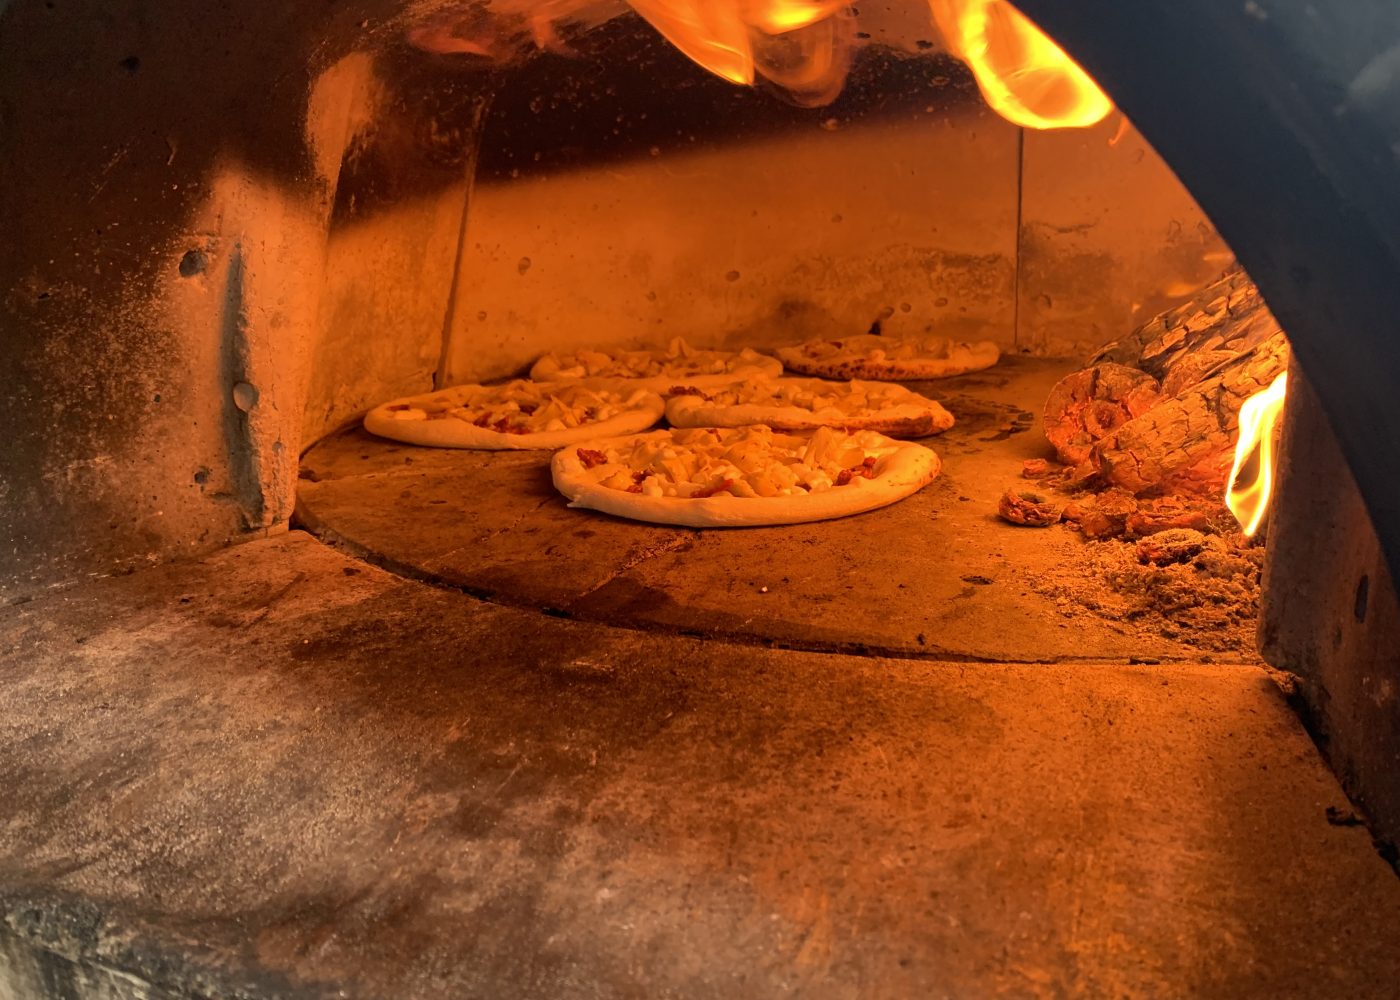 Mobile Woodfire Pizza Catering - Pizzeria On The Road